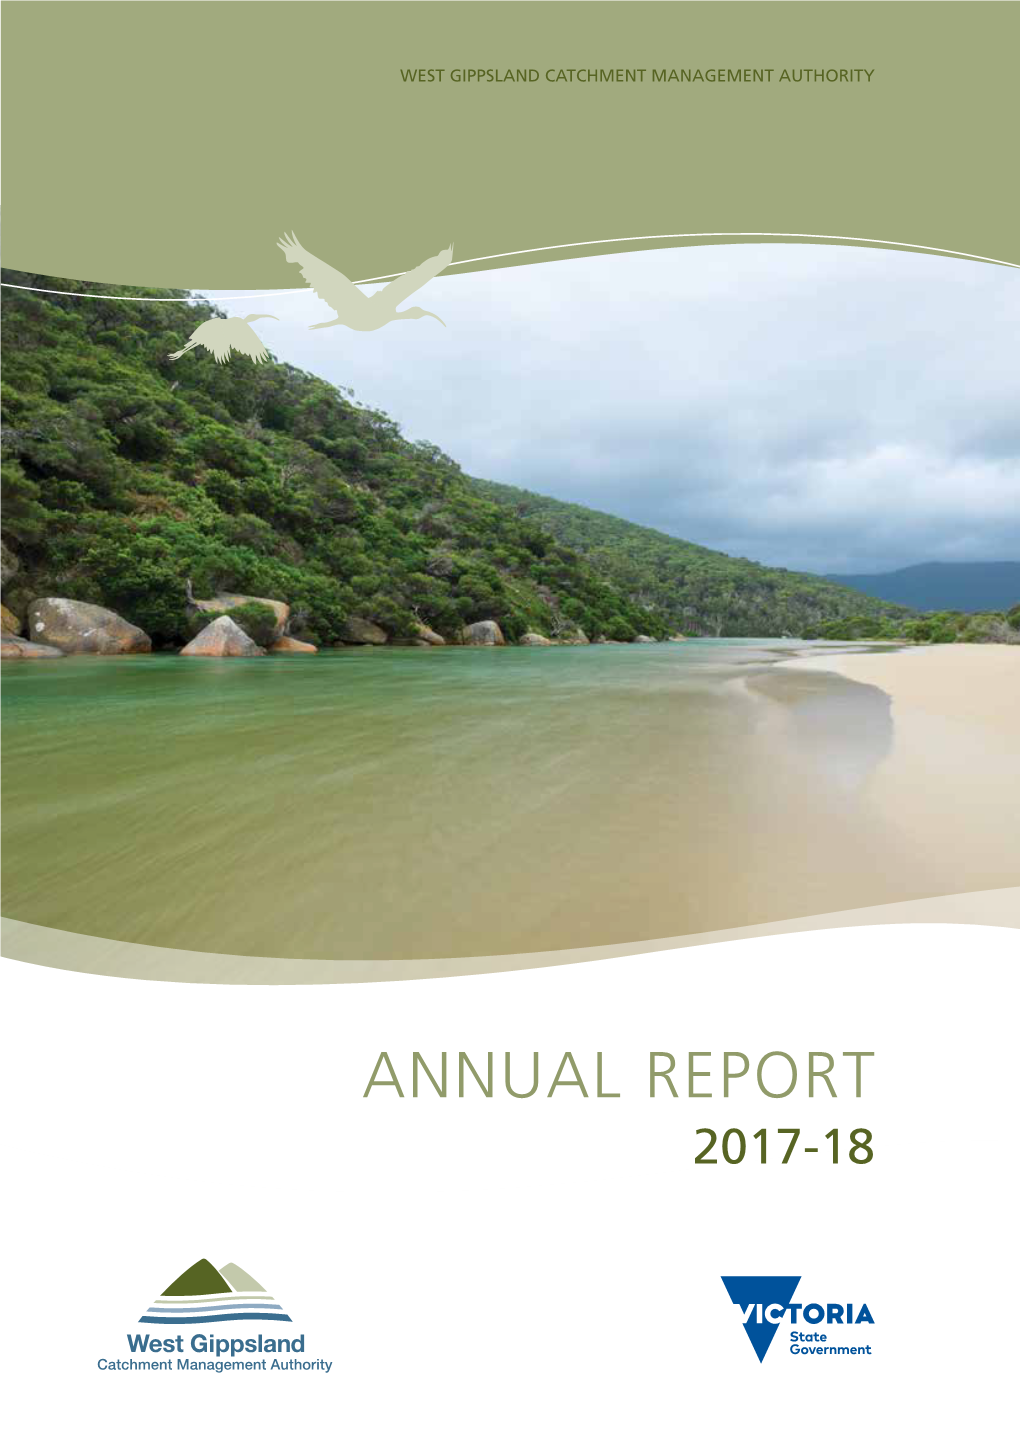 ANNUAL REPORT 2017-18 As a Leader in Natural Resource Management We Will Inspire and Facilitate Partnerships and Action to Achieve Improved Catchment Health